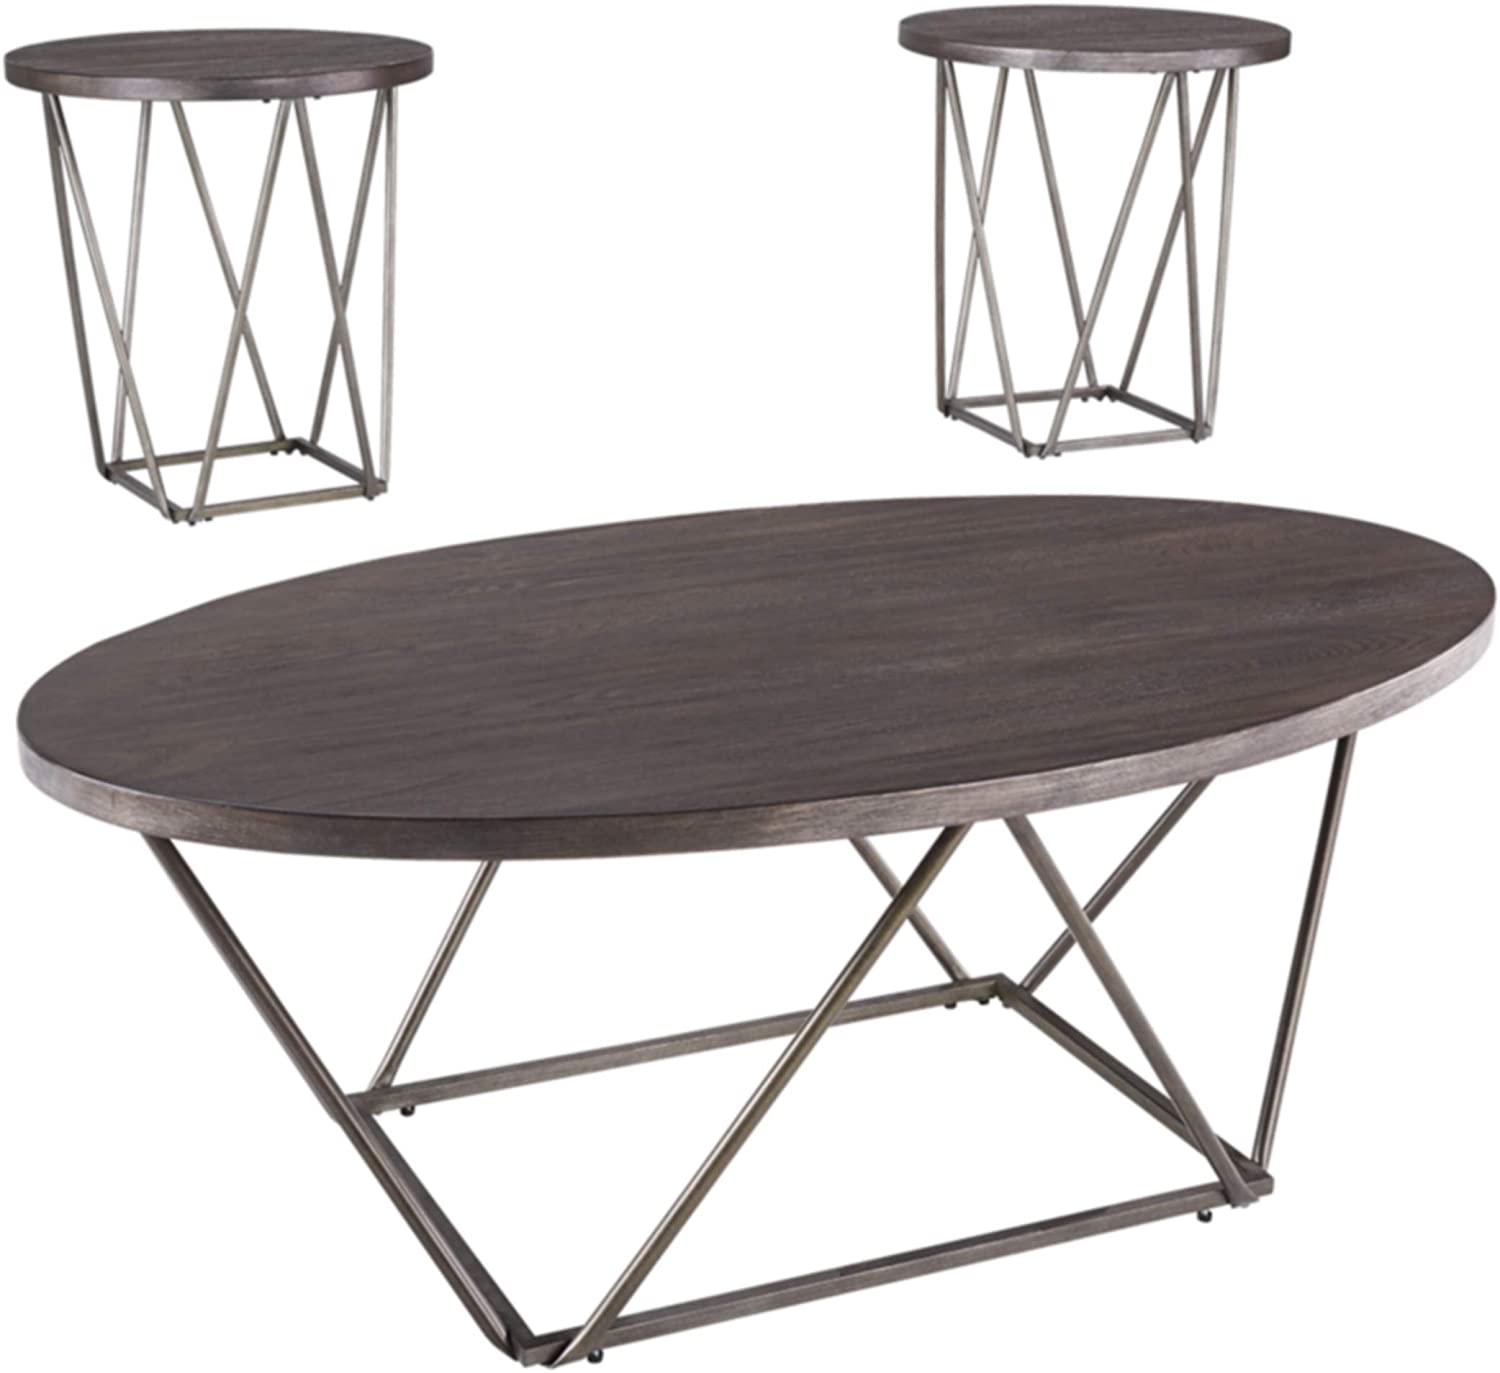 Signature Design by Ashley - Neimhurst Occasional Coffee Table Set of 3, Sleek Brown Wood